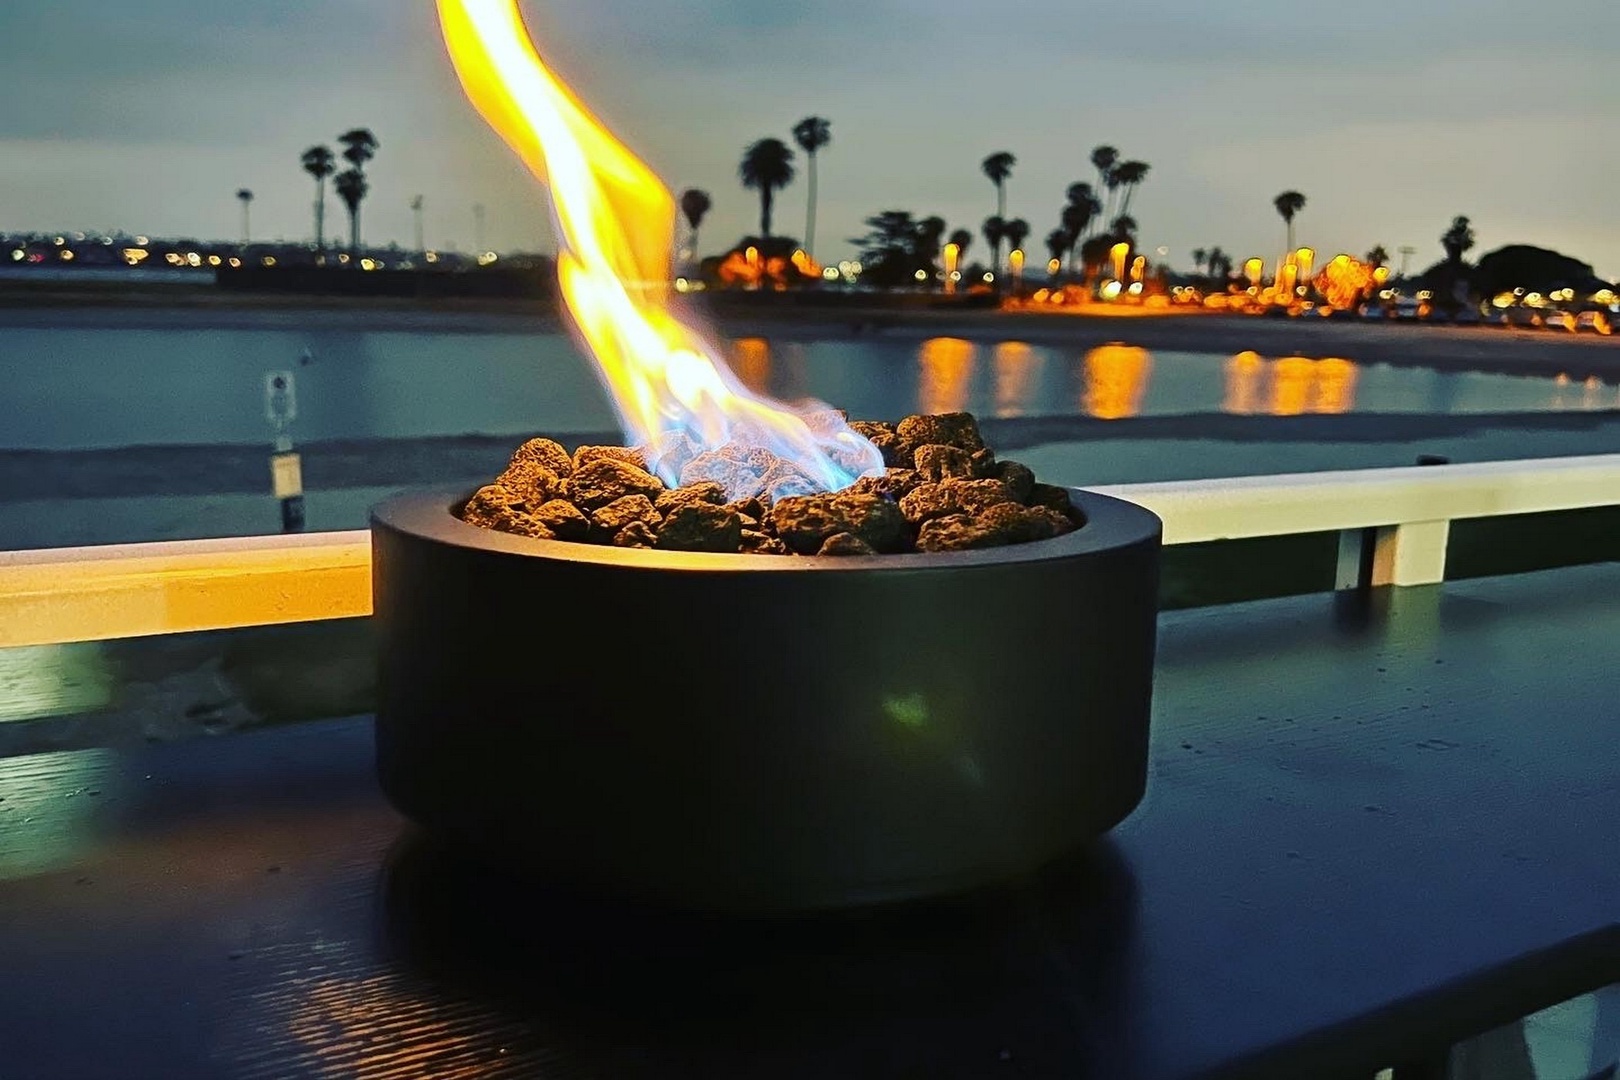 Cozy bar top fire pits and evening views